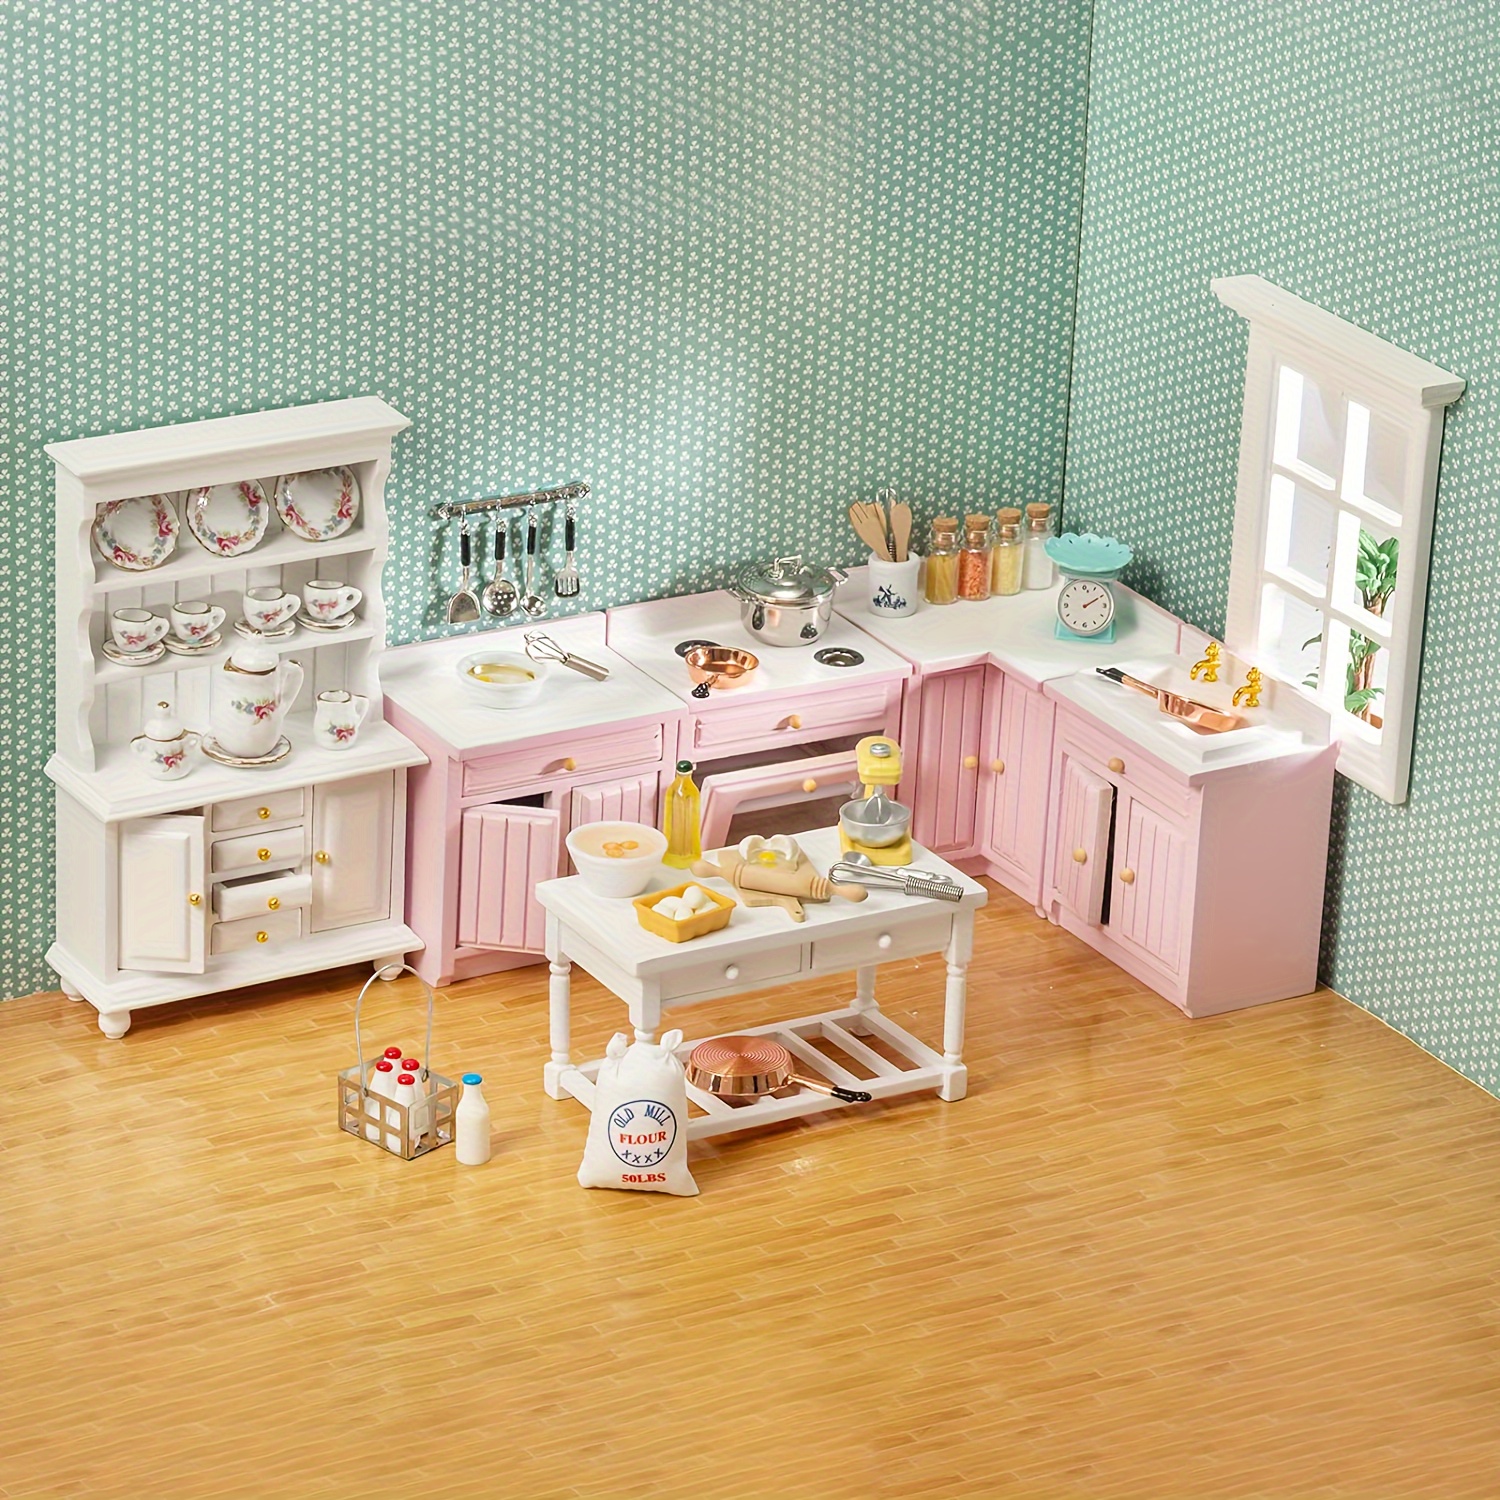 Pin on Dollhouse Project Ideas